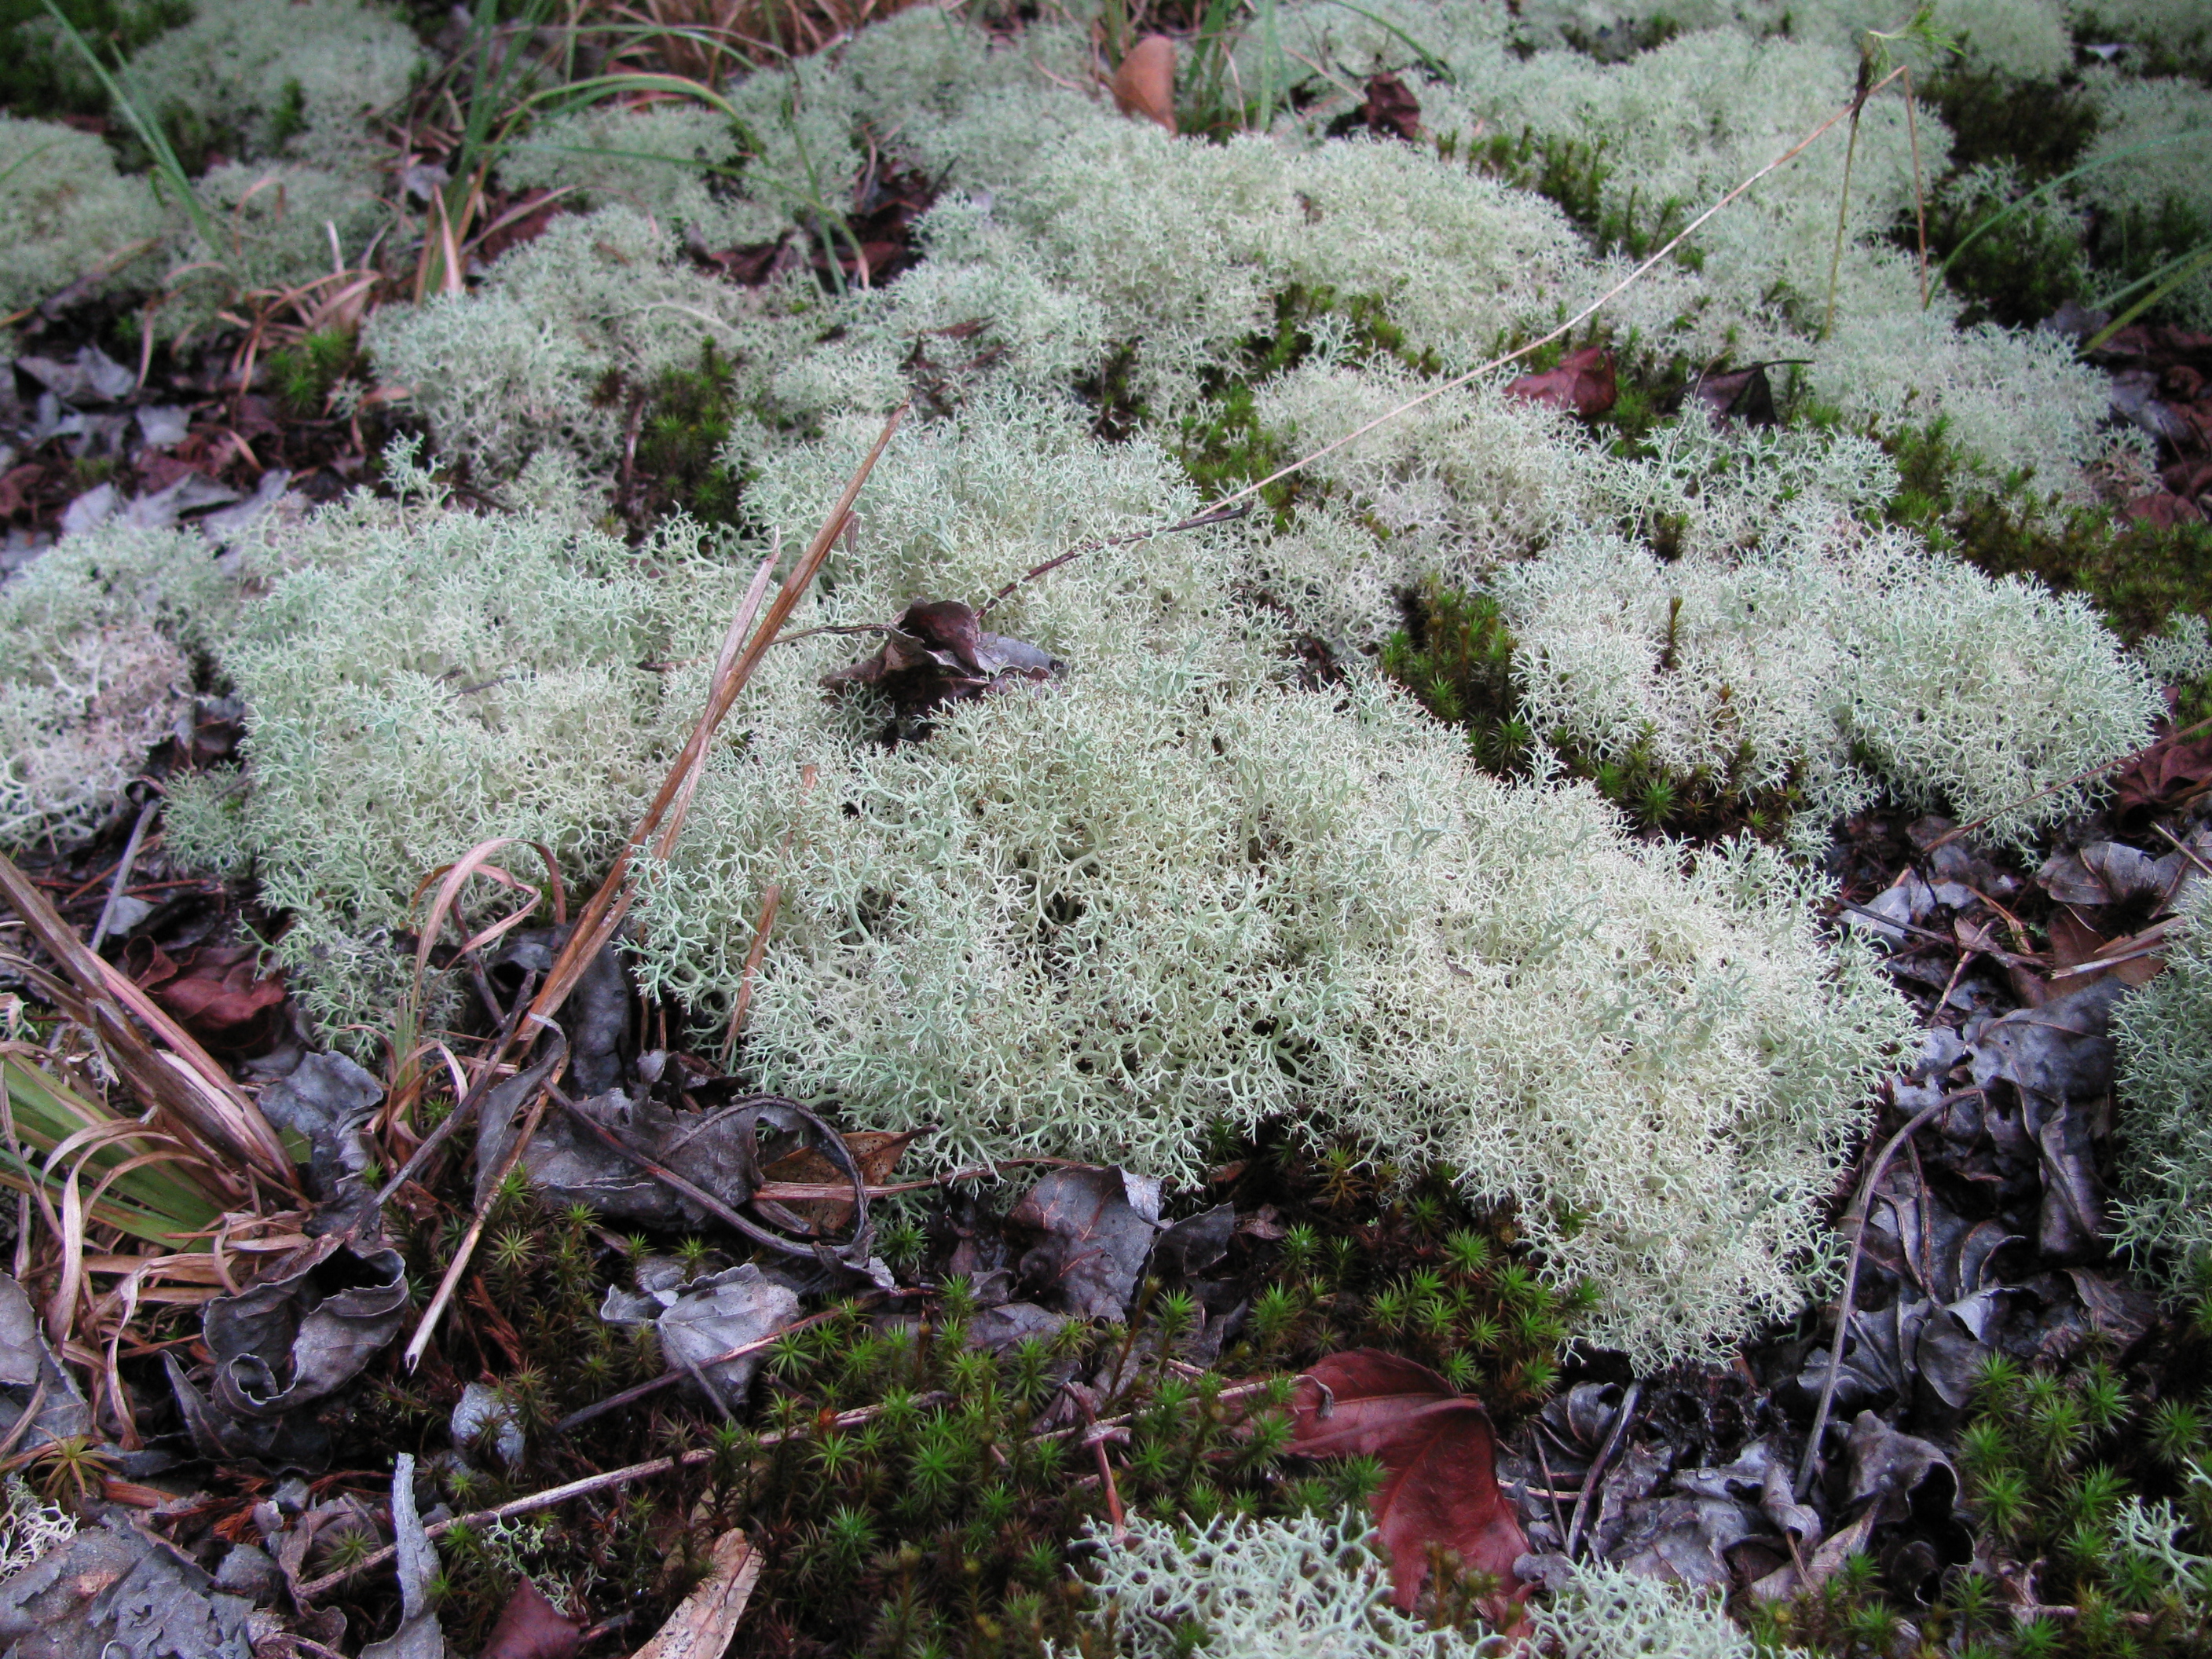 Wetland Plant Series: Lichens - Phinizy Center for Water Sciences